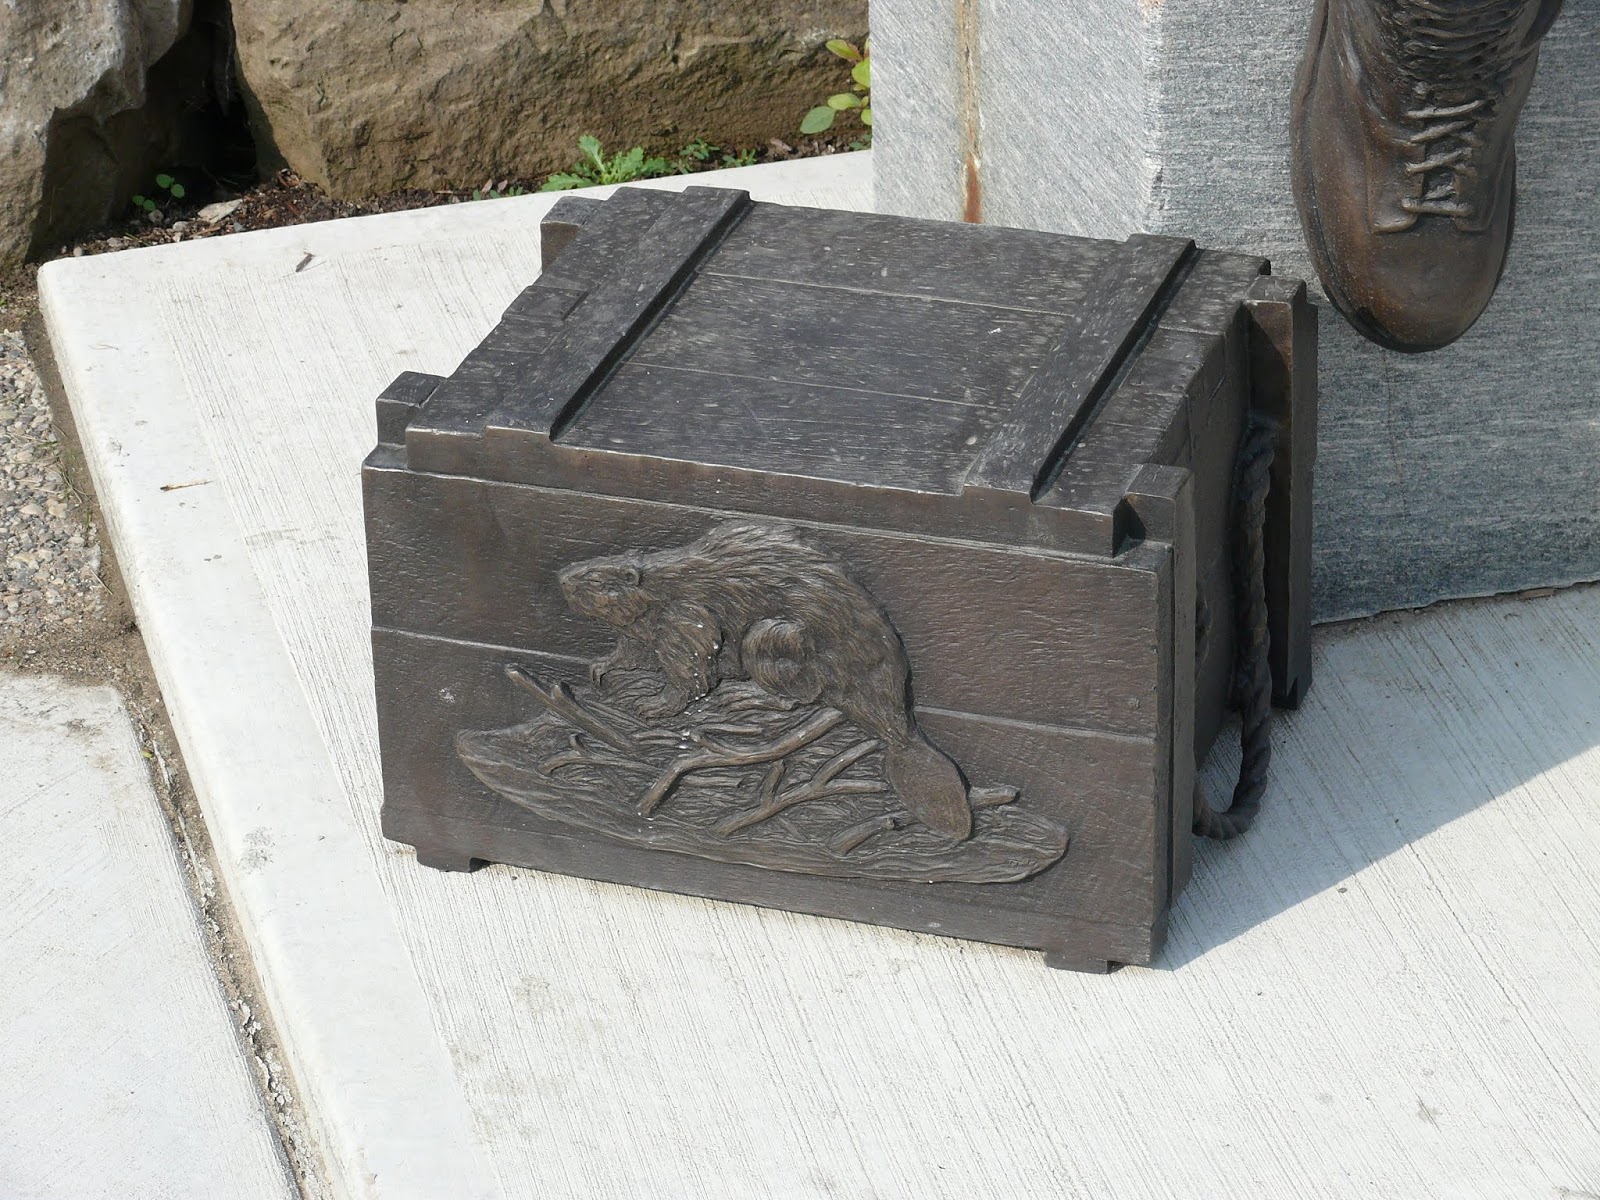 munitions crate